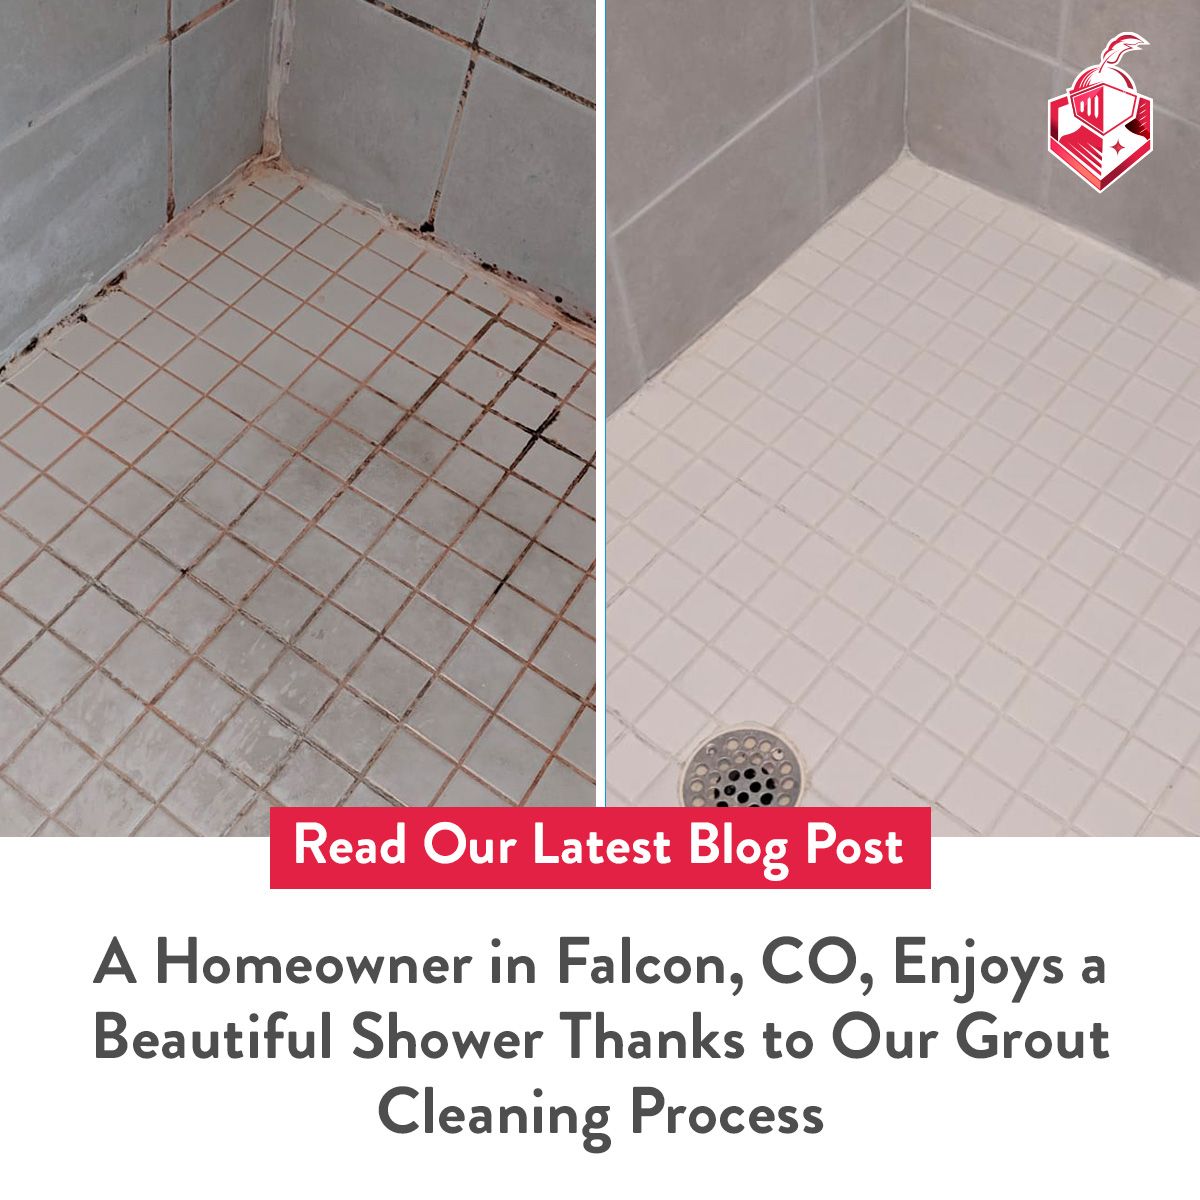 A Homeowner in Falcon, CO, Enjoys a Beautiful Shower Thanks to Our Grout Cleaning Process